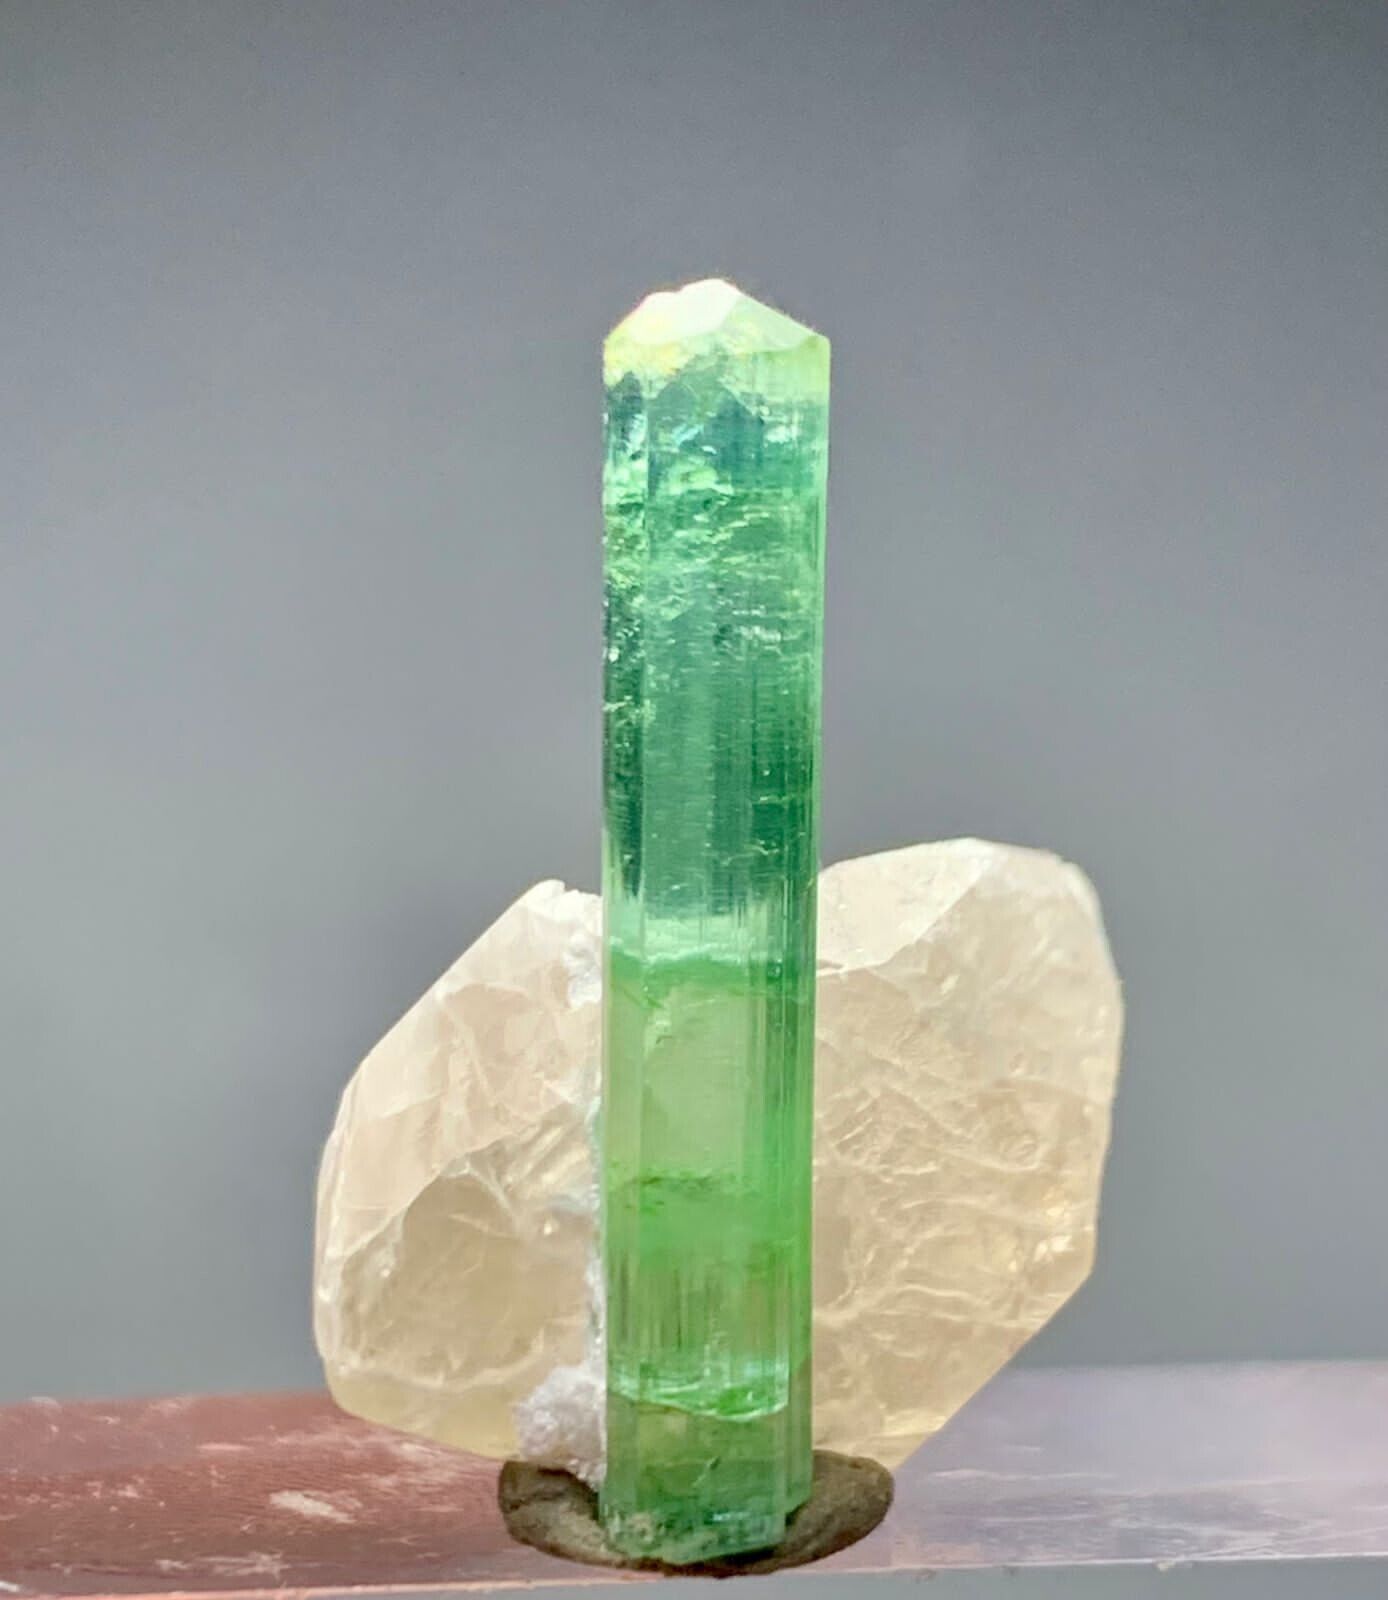 19 Carat beautiful terminated tourmaline with quartz crystal  from Afg